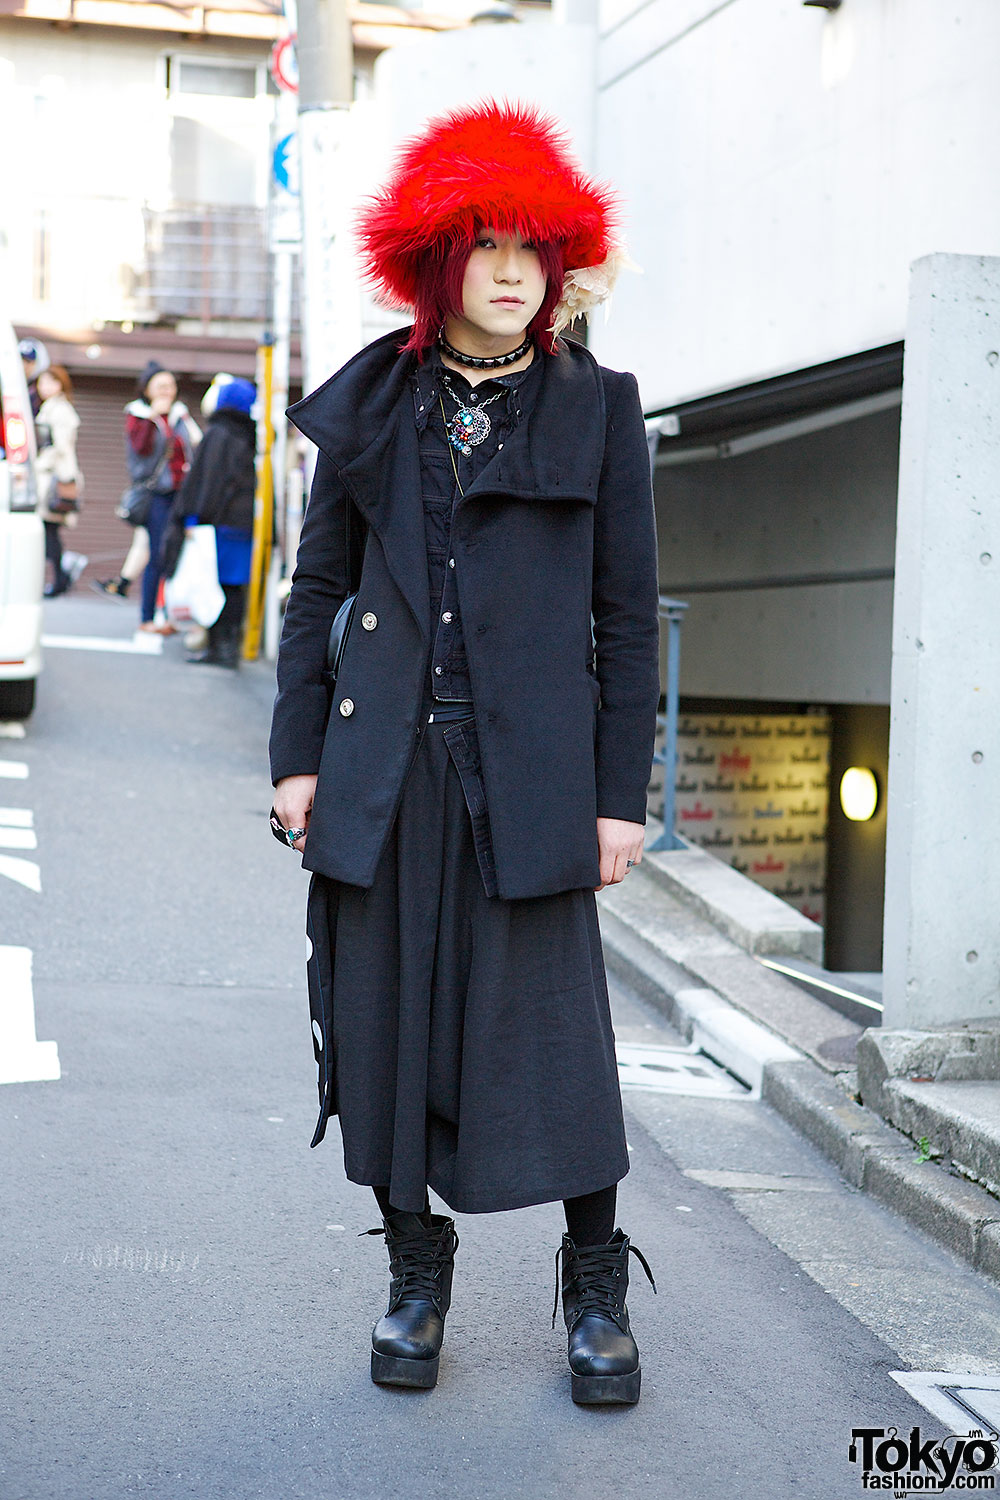 All Black AnkoRock & Algonquins Outfit w/ Red Hat in Harajuku – Tokyo ...